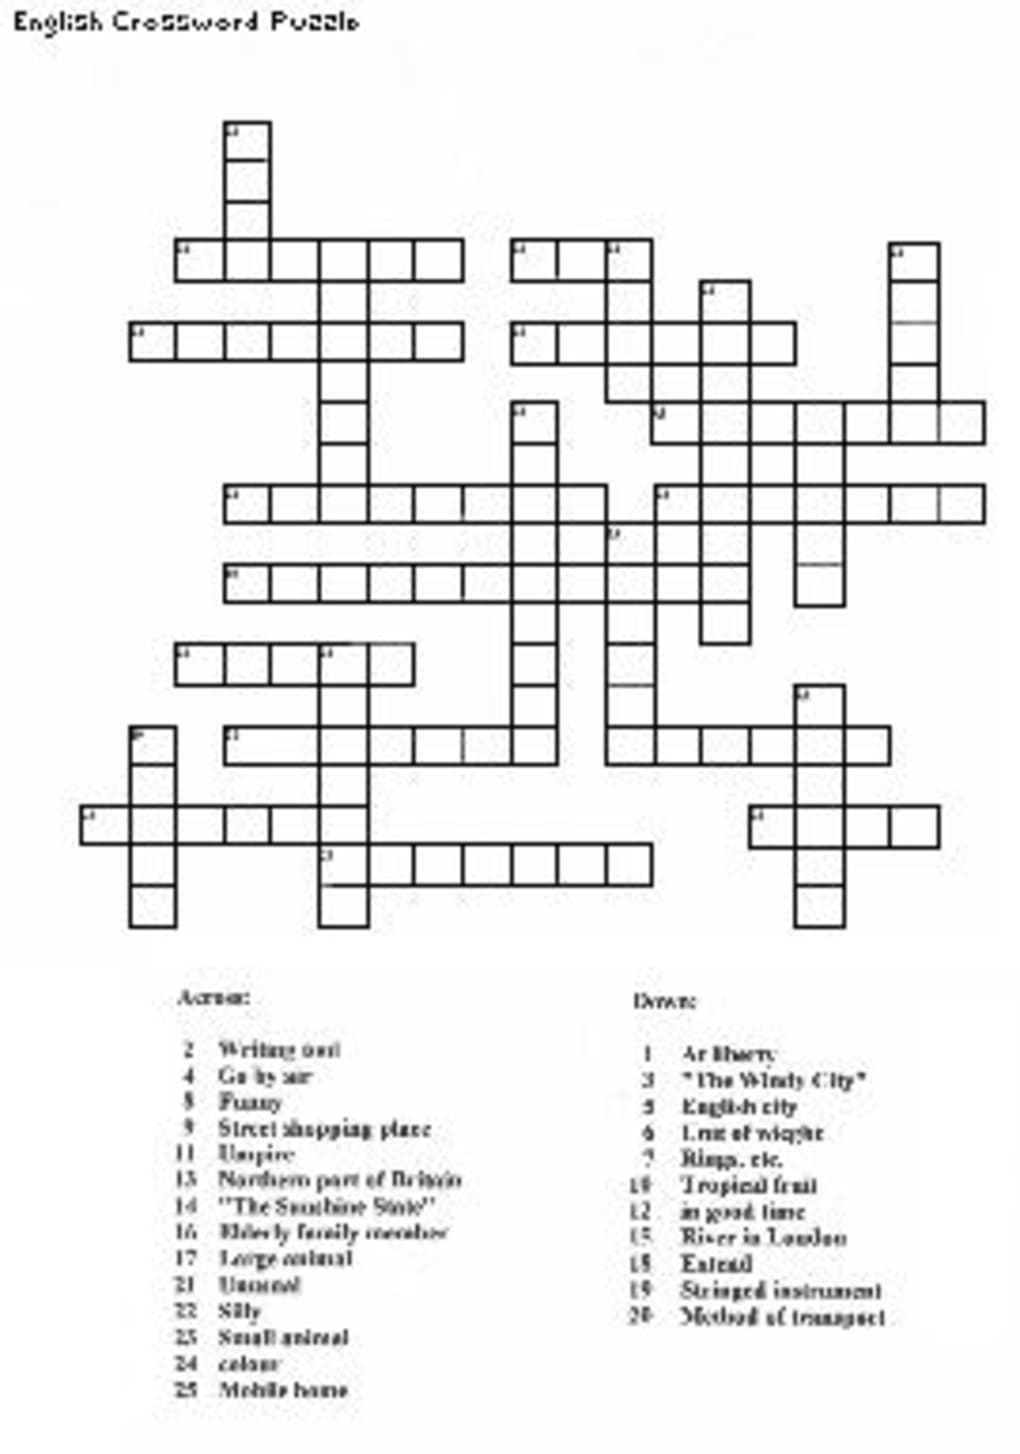 Puzzle Maker 214 Best Crossword Puzzles Images On Puzzle Maker Canada Puzzle Team Free Crossword Puzzle Maker Crossword Puzzle Maker World From The S Toolbox Puzzle Maker